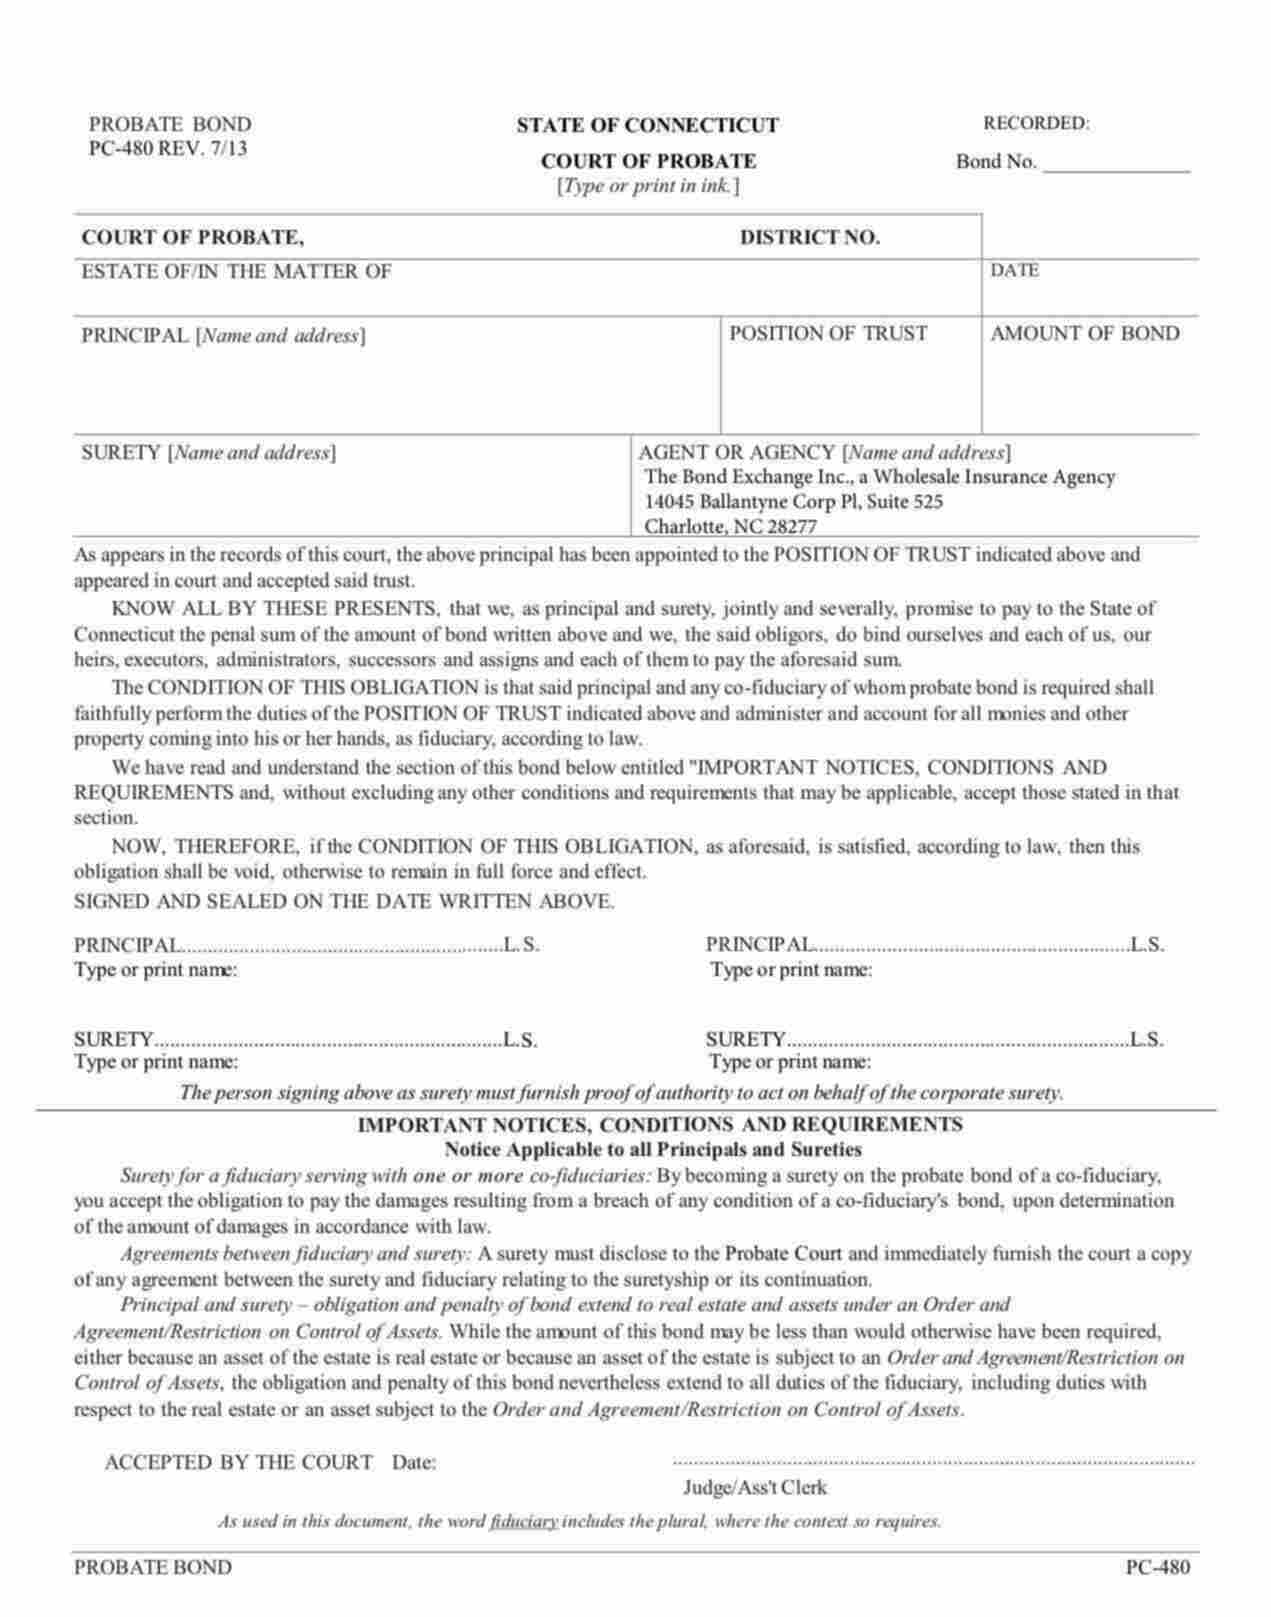 Connecticut Probate Administrator, Executor, Conservator, or Guardian Bond Form